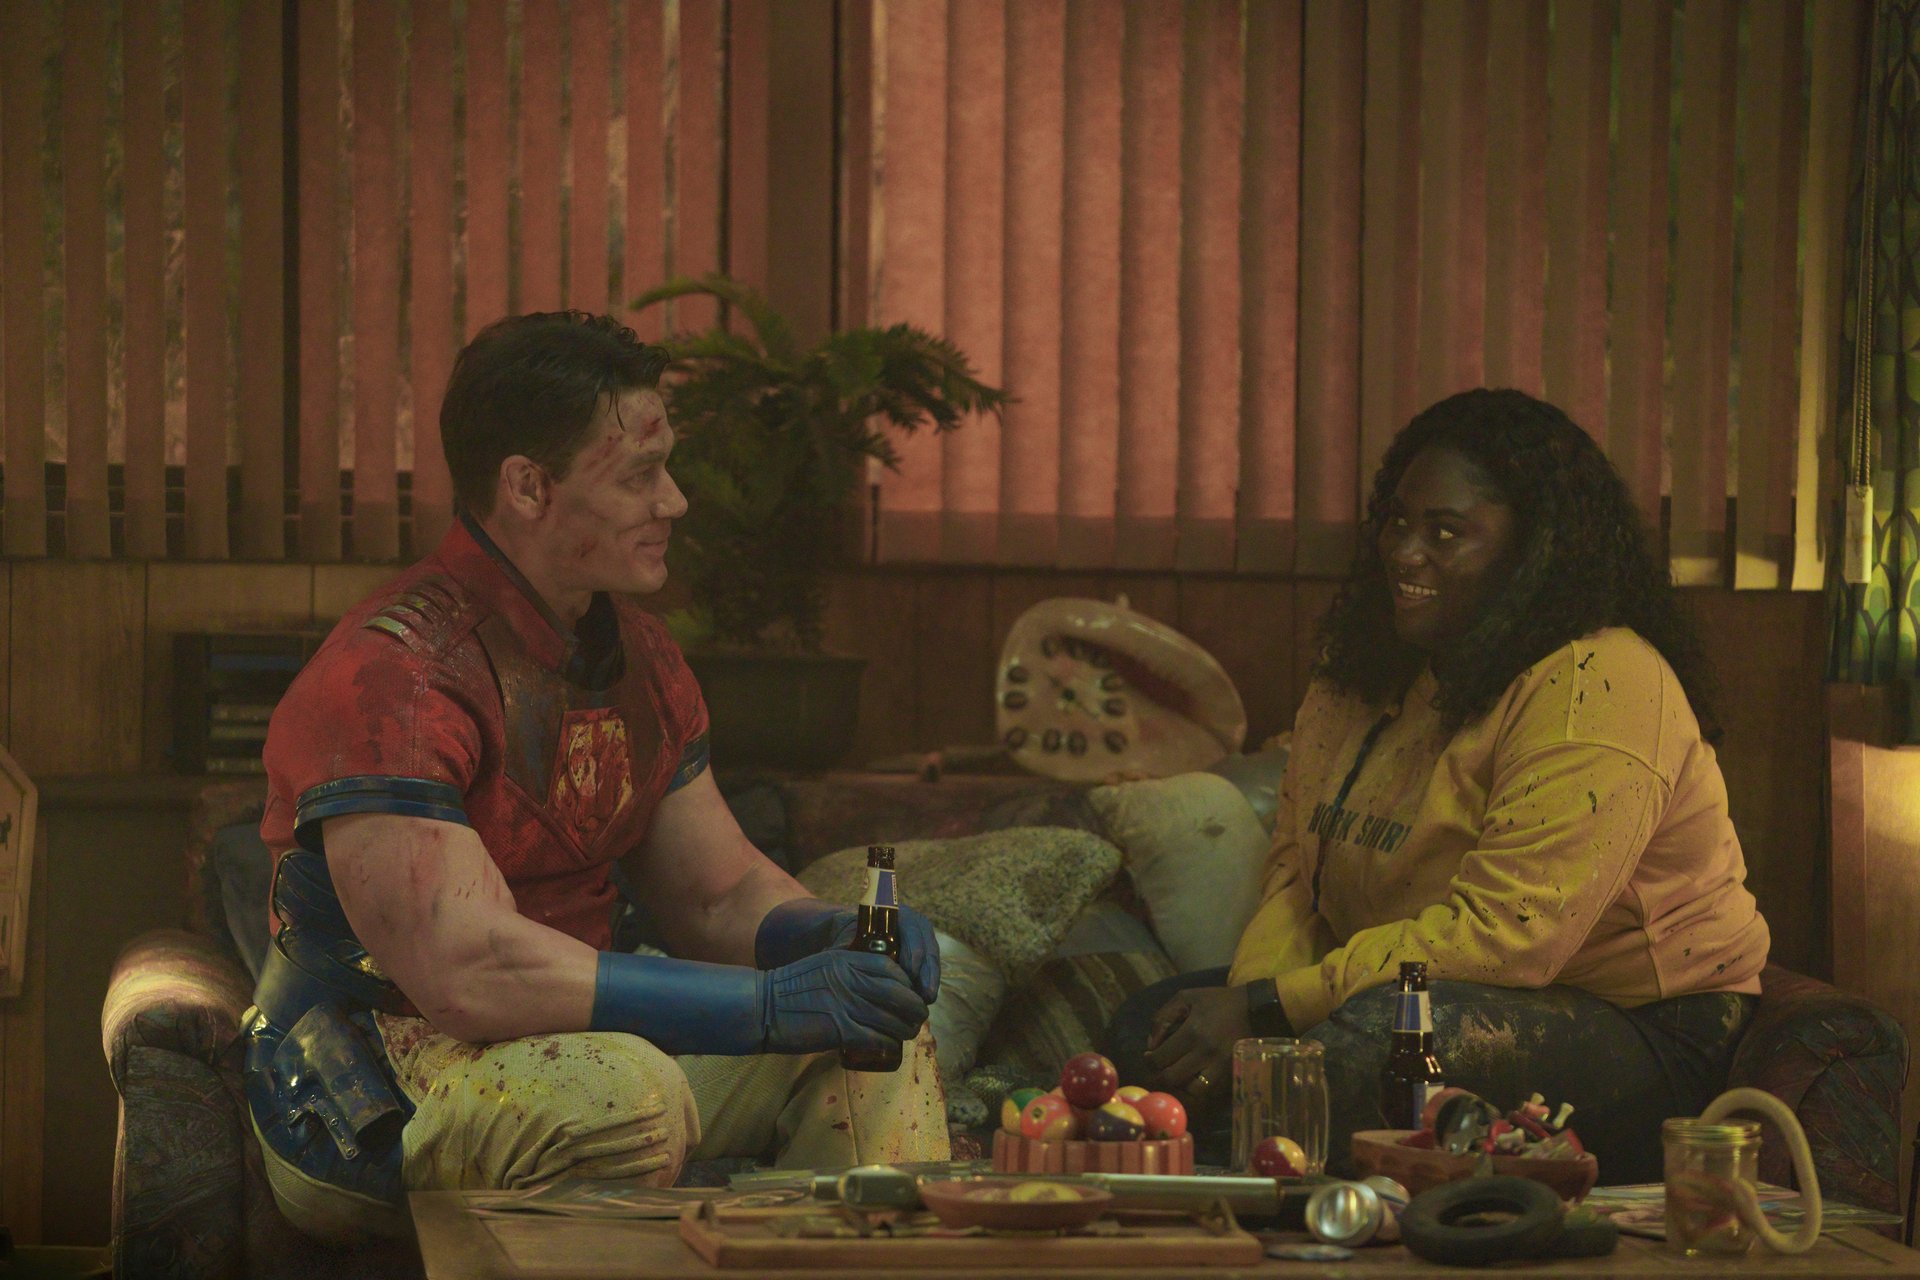 John Cena and Danielle Brooks as Peacemaker and Leota Adebayo in DC's 'Peacemaker' Episode 5. They're sitting on the couch and talking to one another.